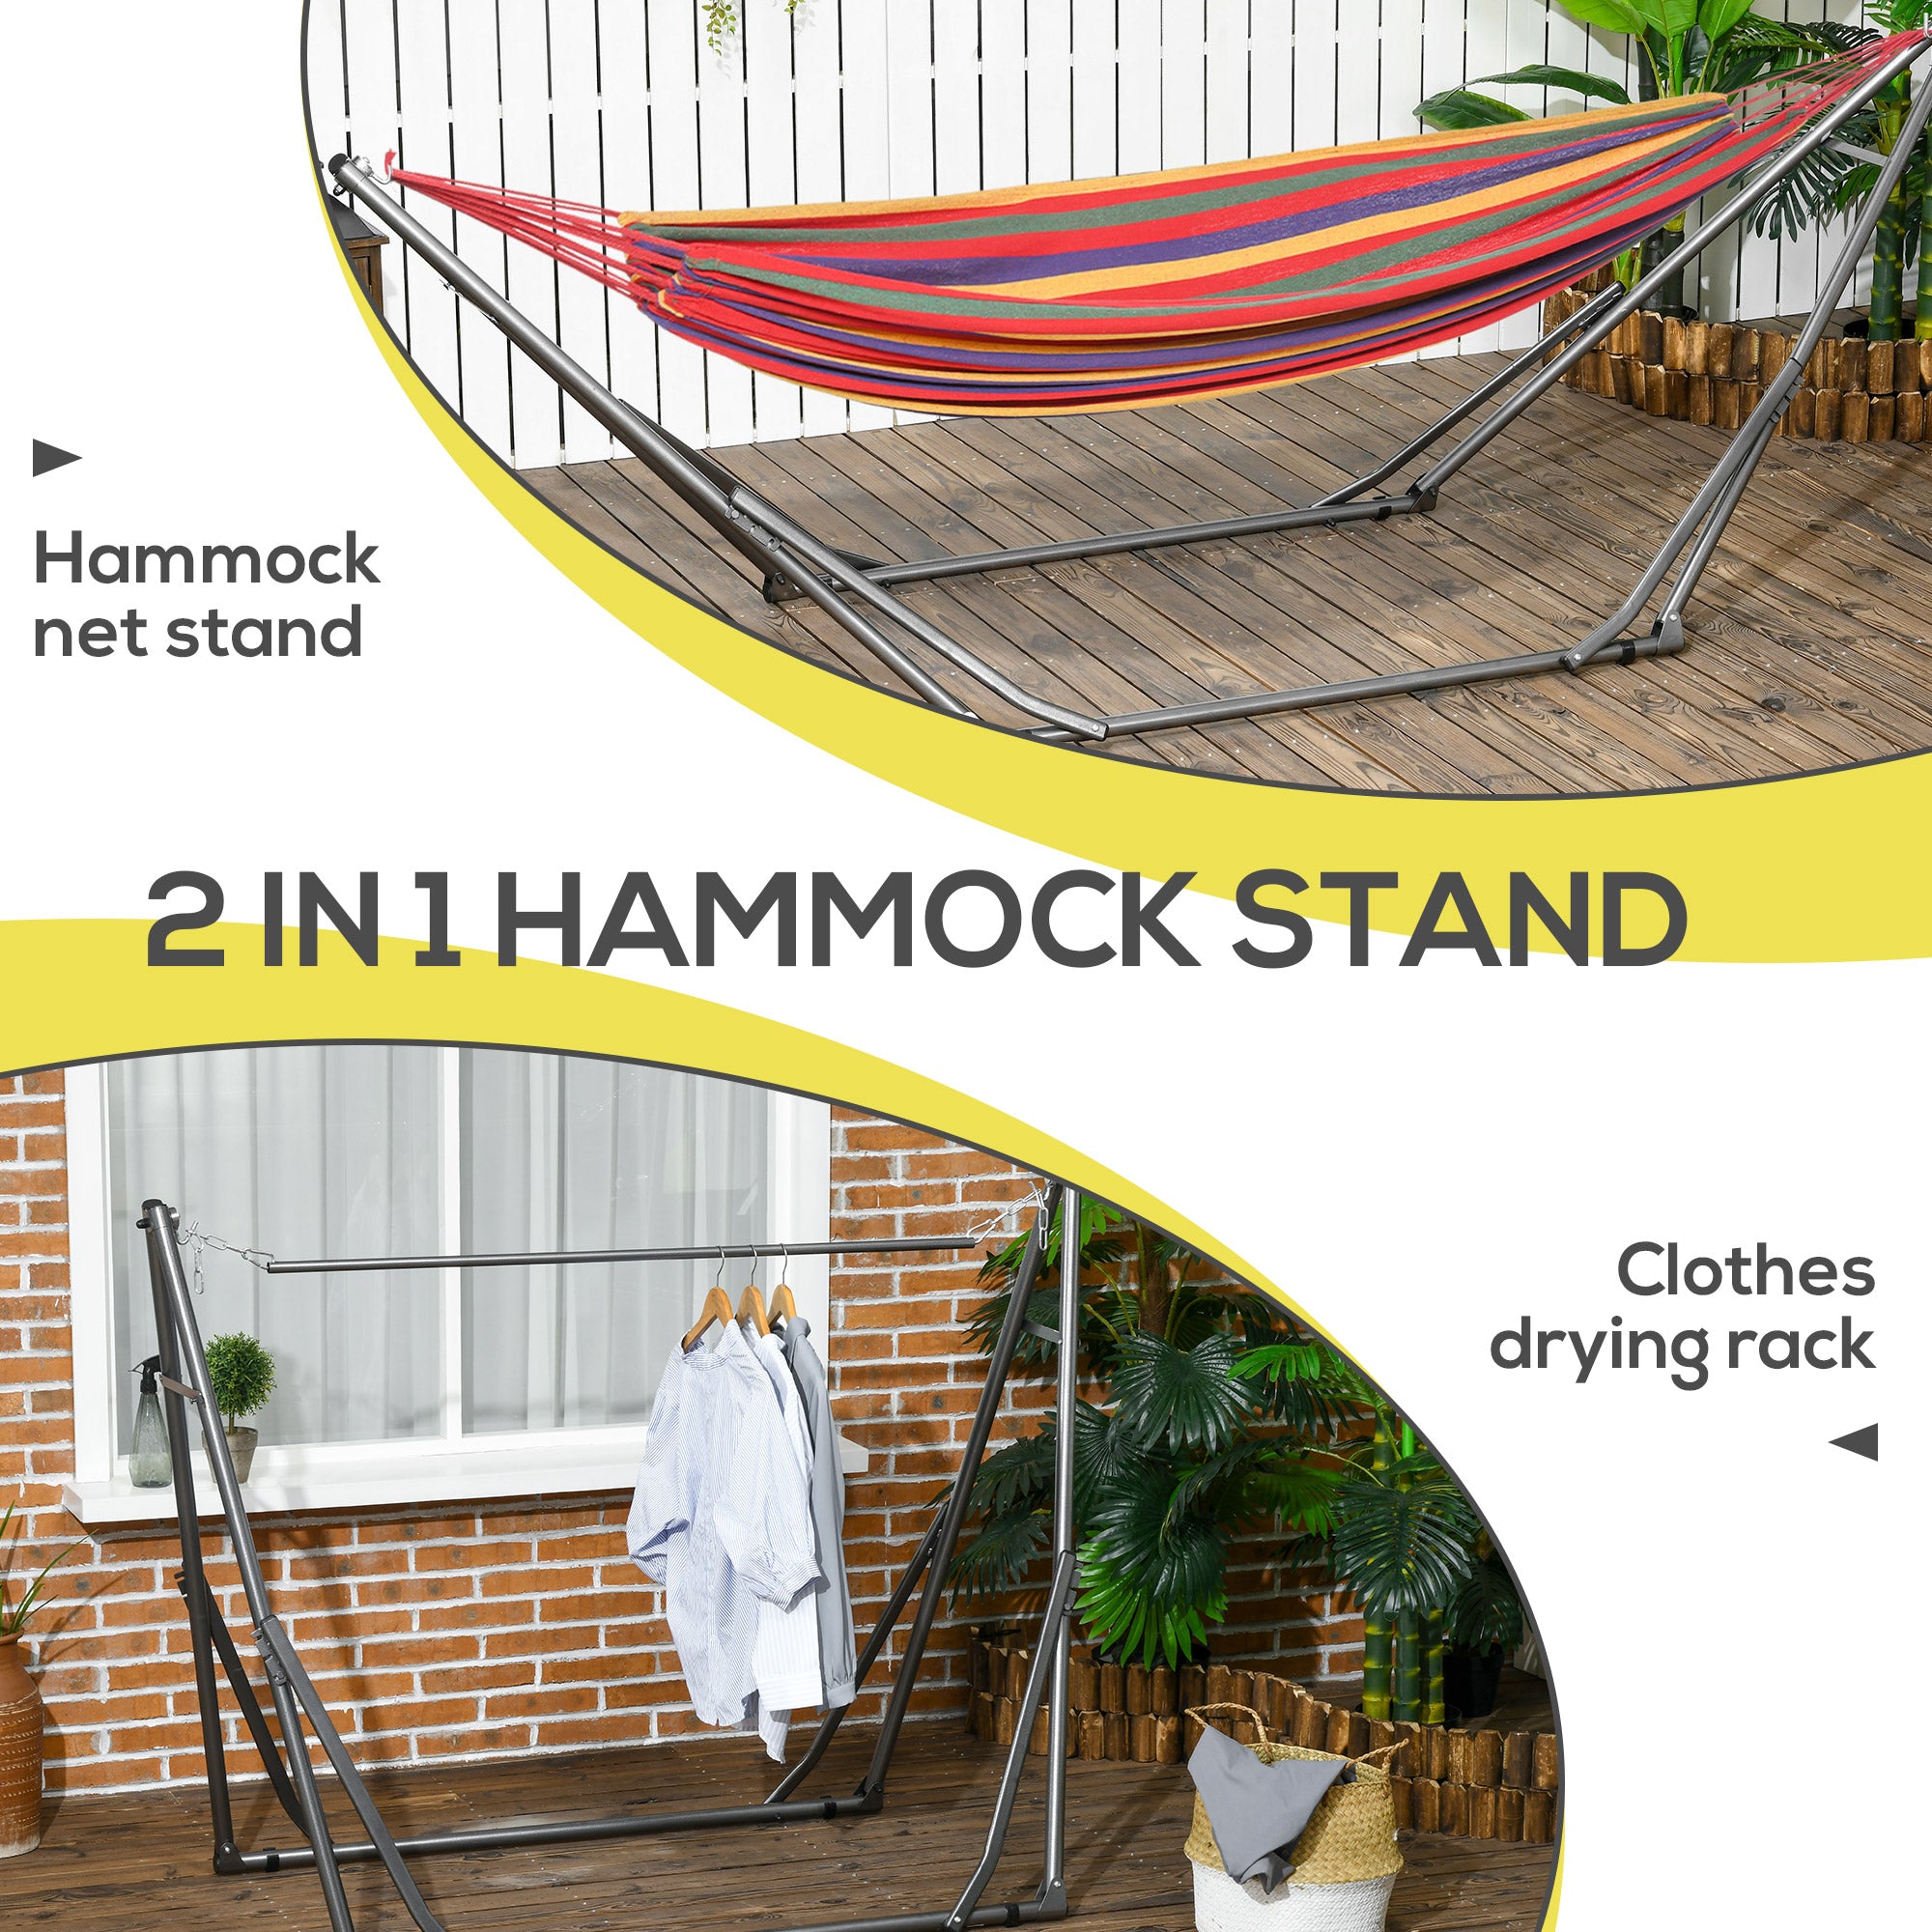 Outsunny Foldable Hammock Stand, Portable Hammock with Metal Frame, 2 in 1 Hammock Net Stand, Clothes Drying Rack, Load Capacity 120kg Black